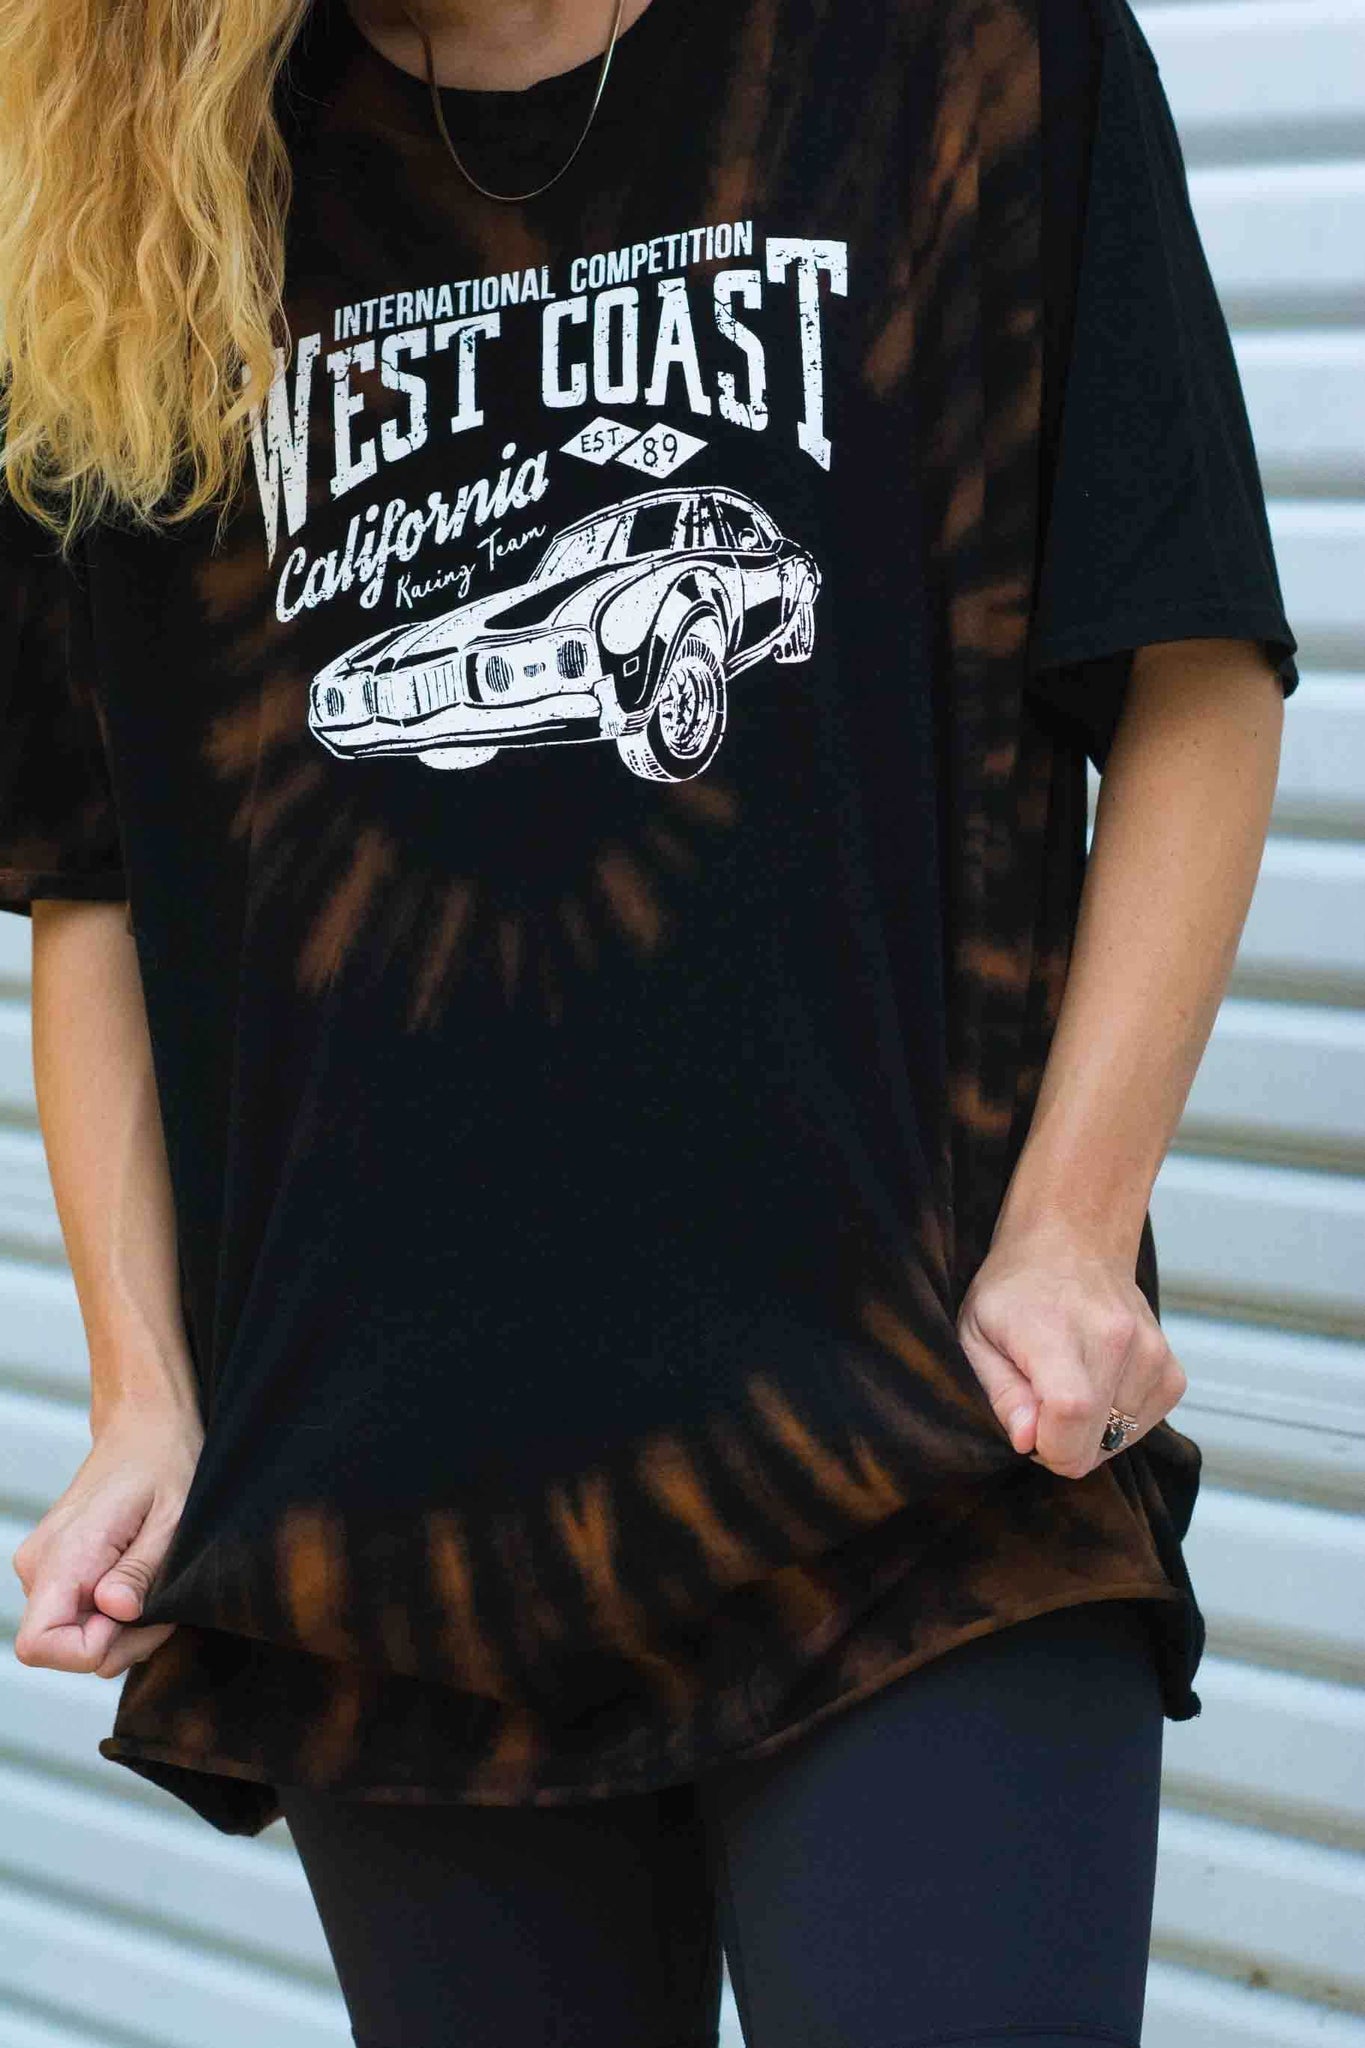 WEST COAST GRAPHIC TEE KITS BRAND  affordable Womens and Mens trendy online streetwear fashion boutique 